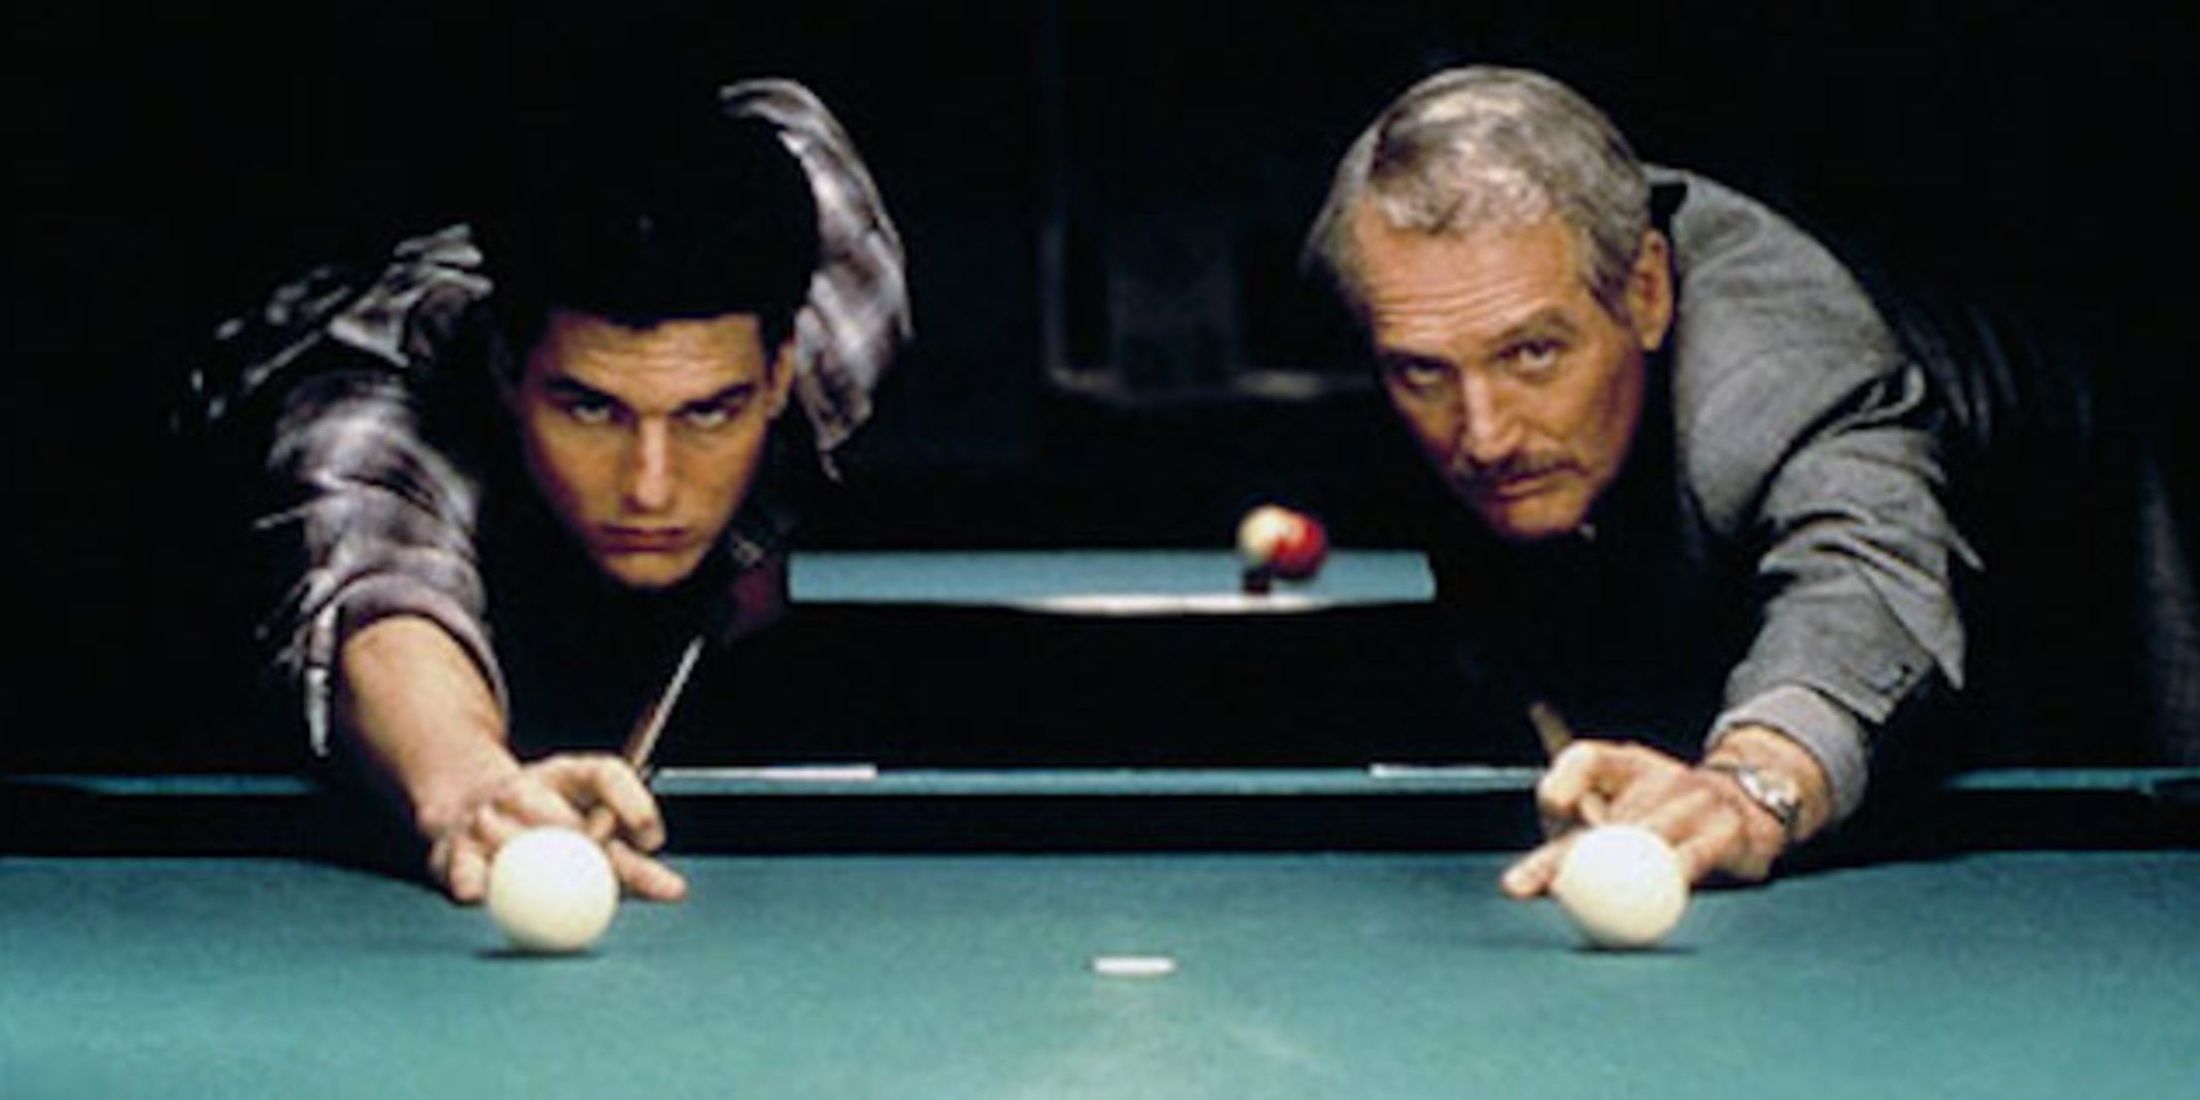 Vincent and Eddie do trick shots on a ppol table in The Color of Money